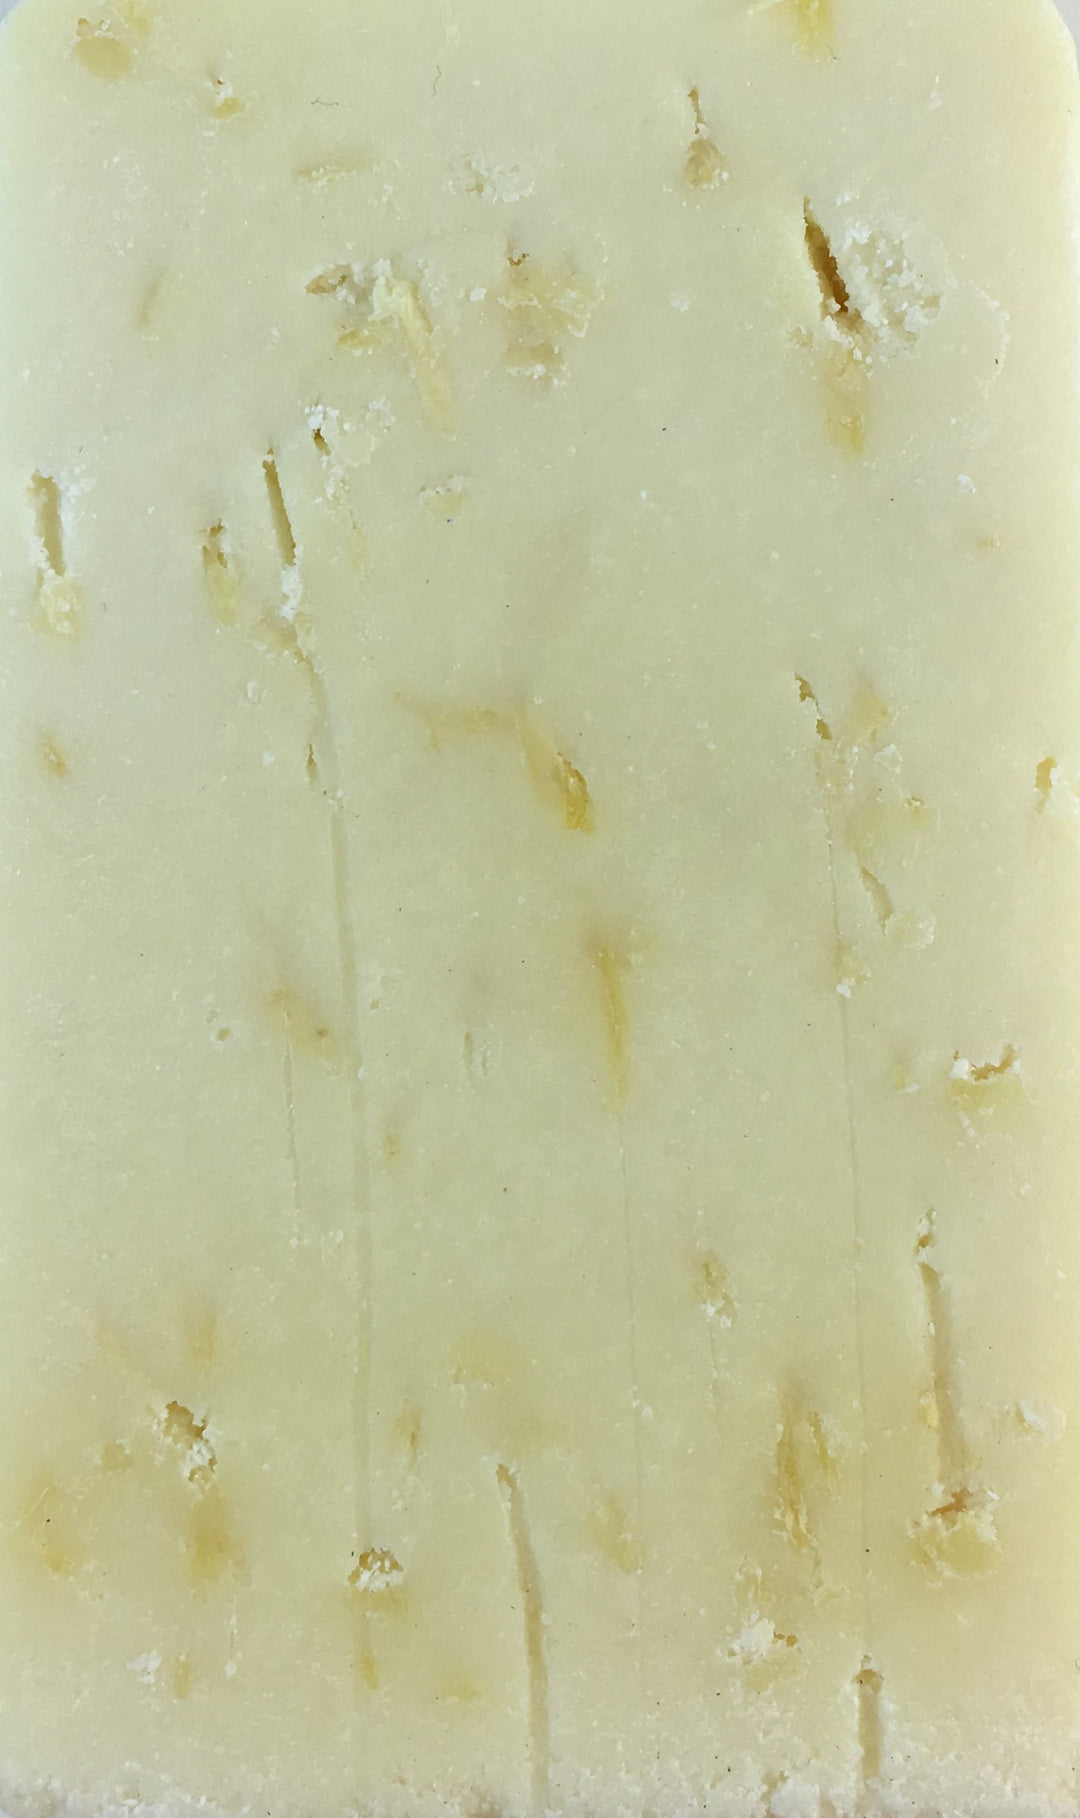 Castile Soap Bar (Calendula Herbal) from Handmade Naturals-not included in the 5 Soap Deal